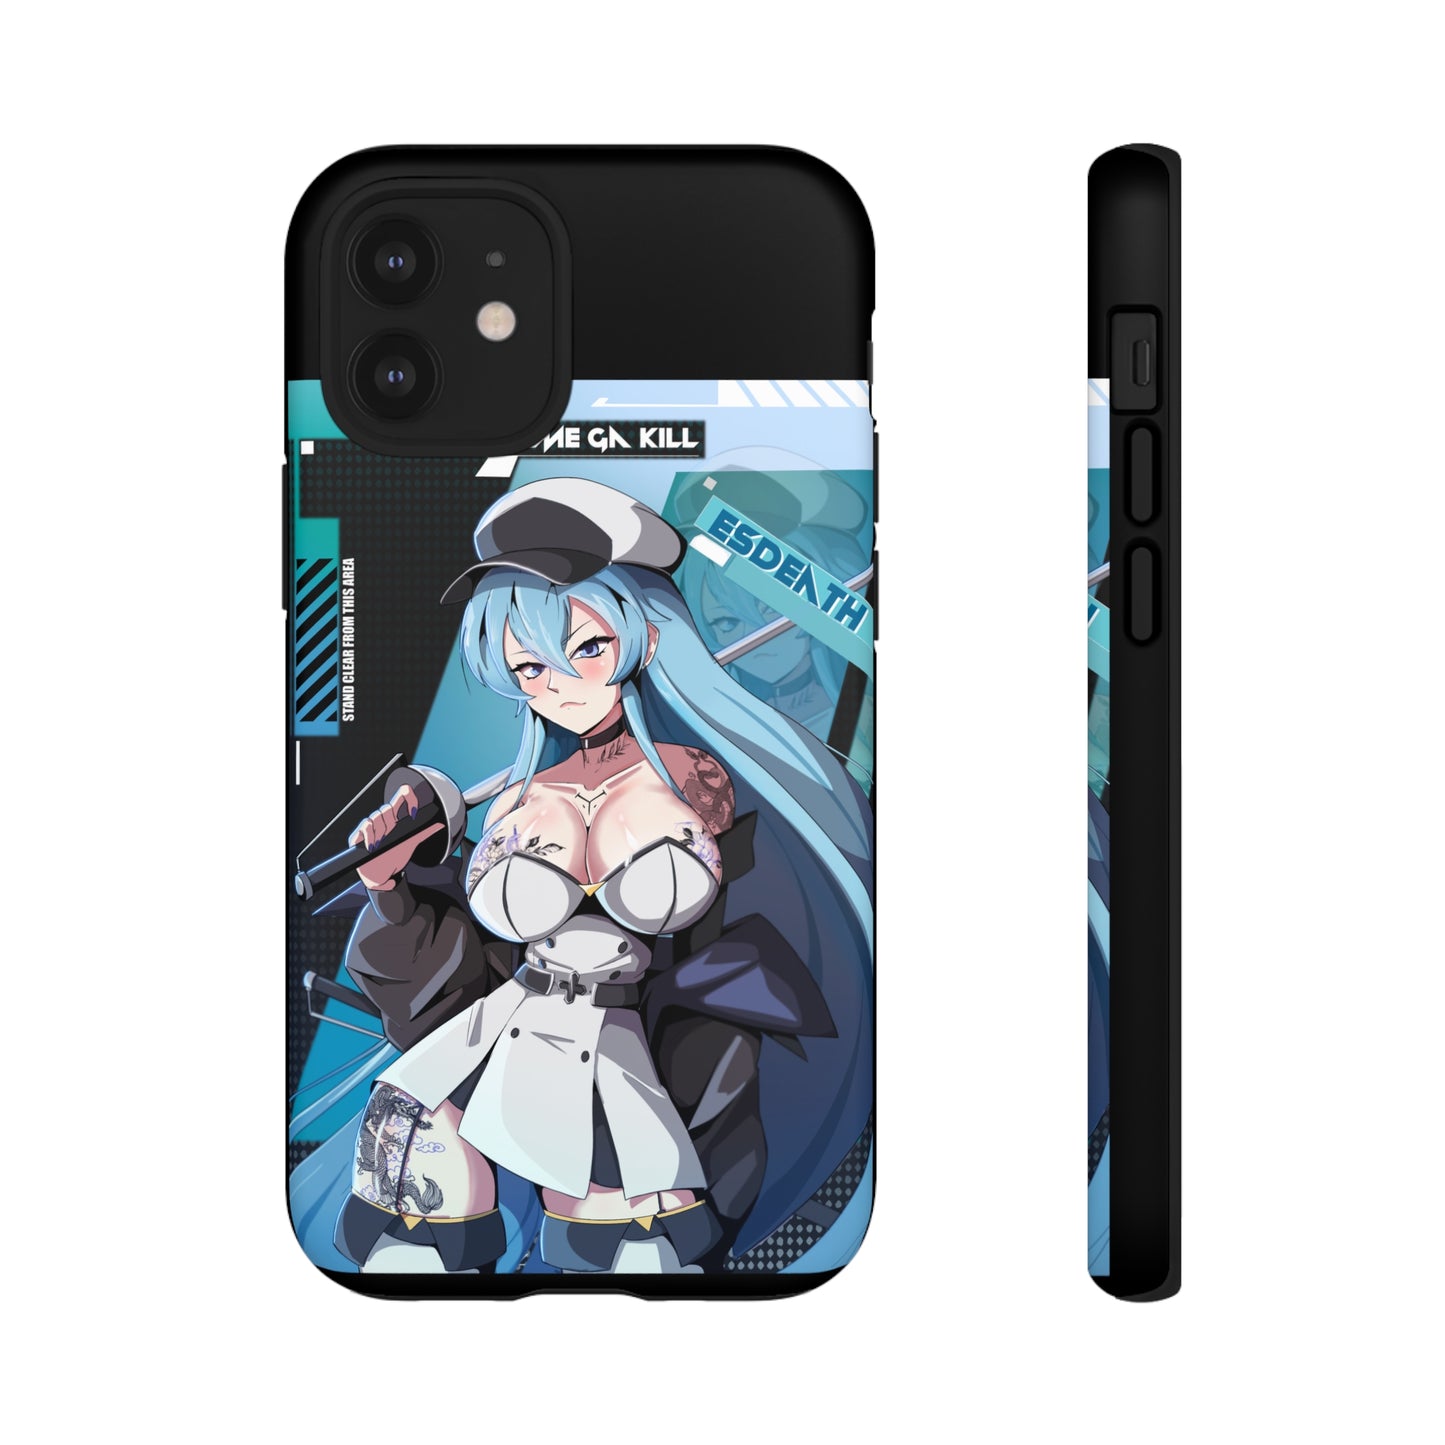 Esdeath iPhone Cases